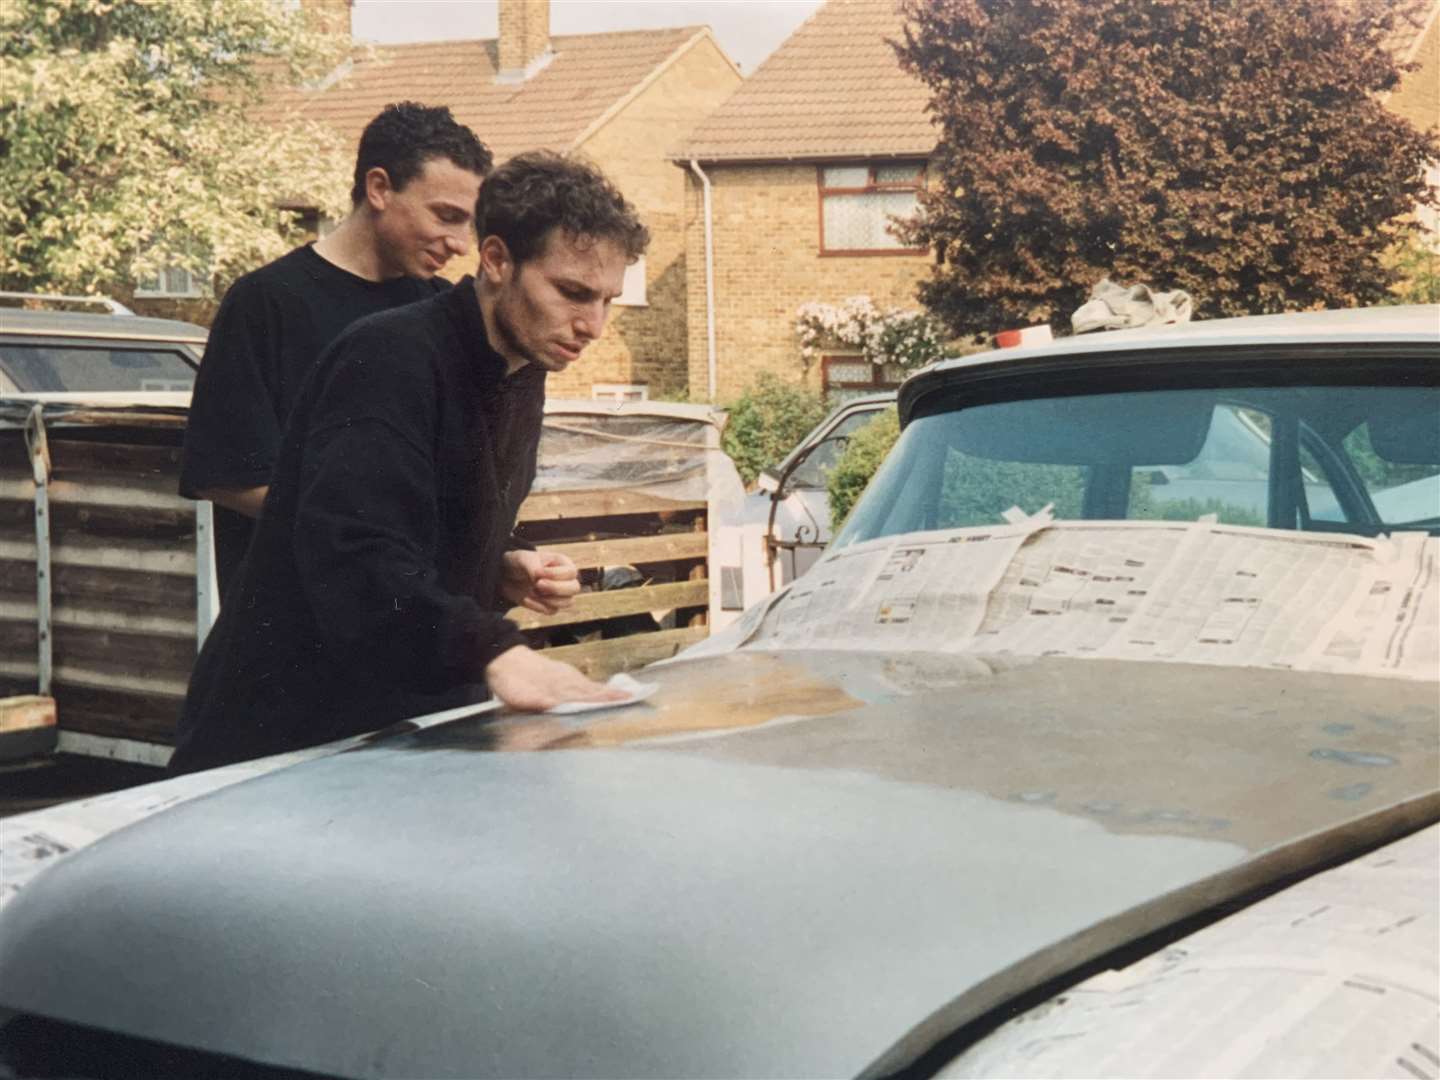 Ross Hutchinson and his late brother Ryde working on a vintage Chrysler